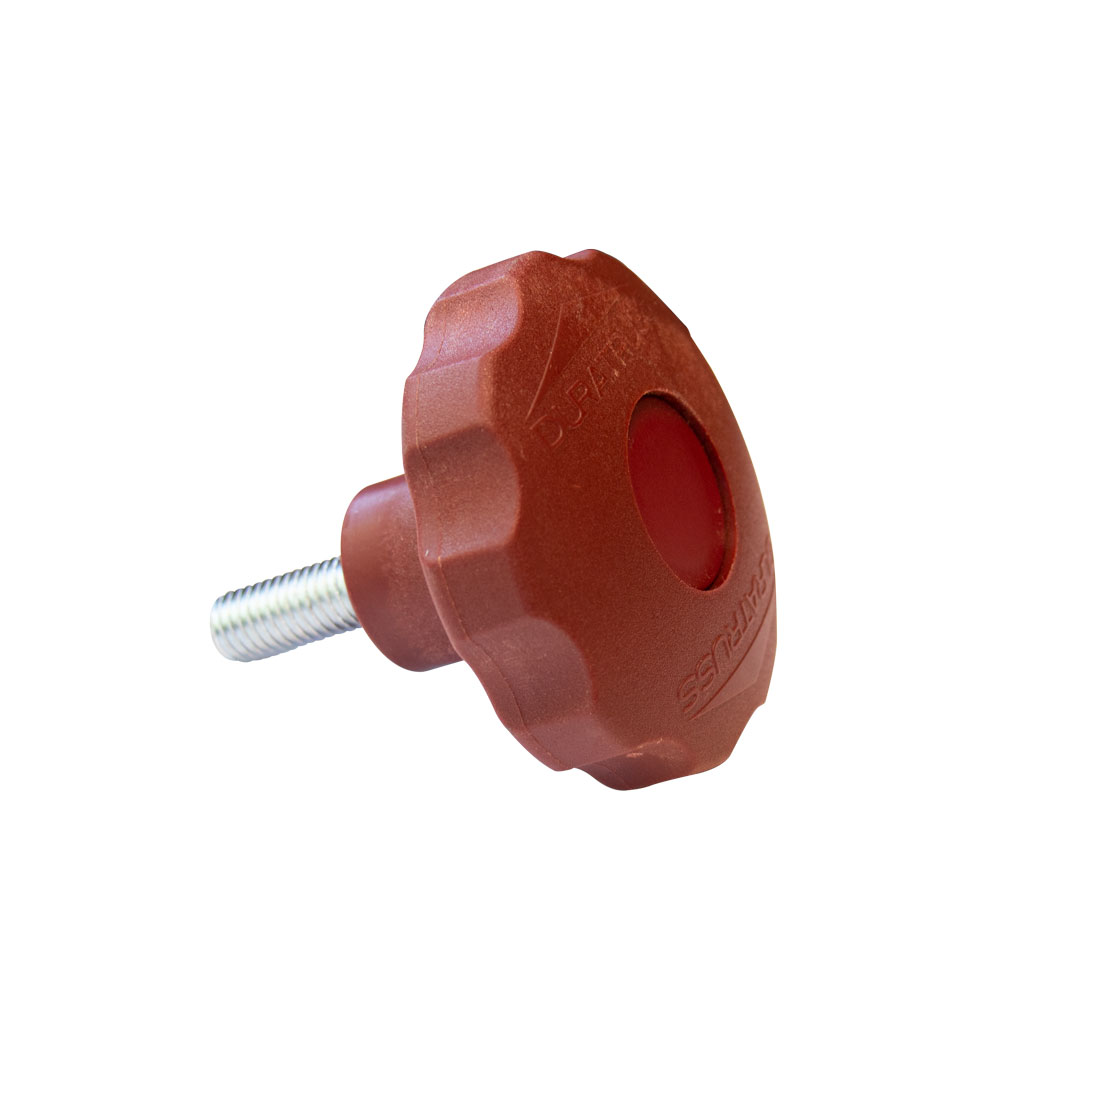  DURASTAGE Red knob for handrail clamp